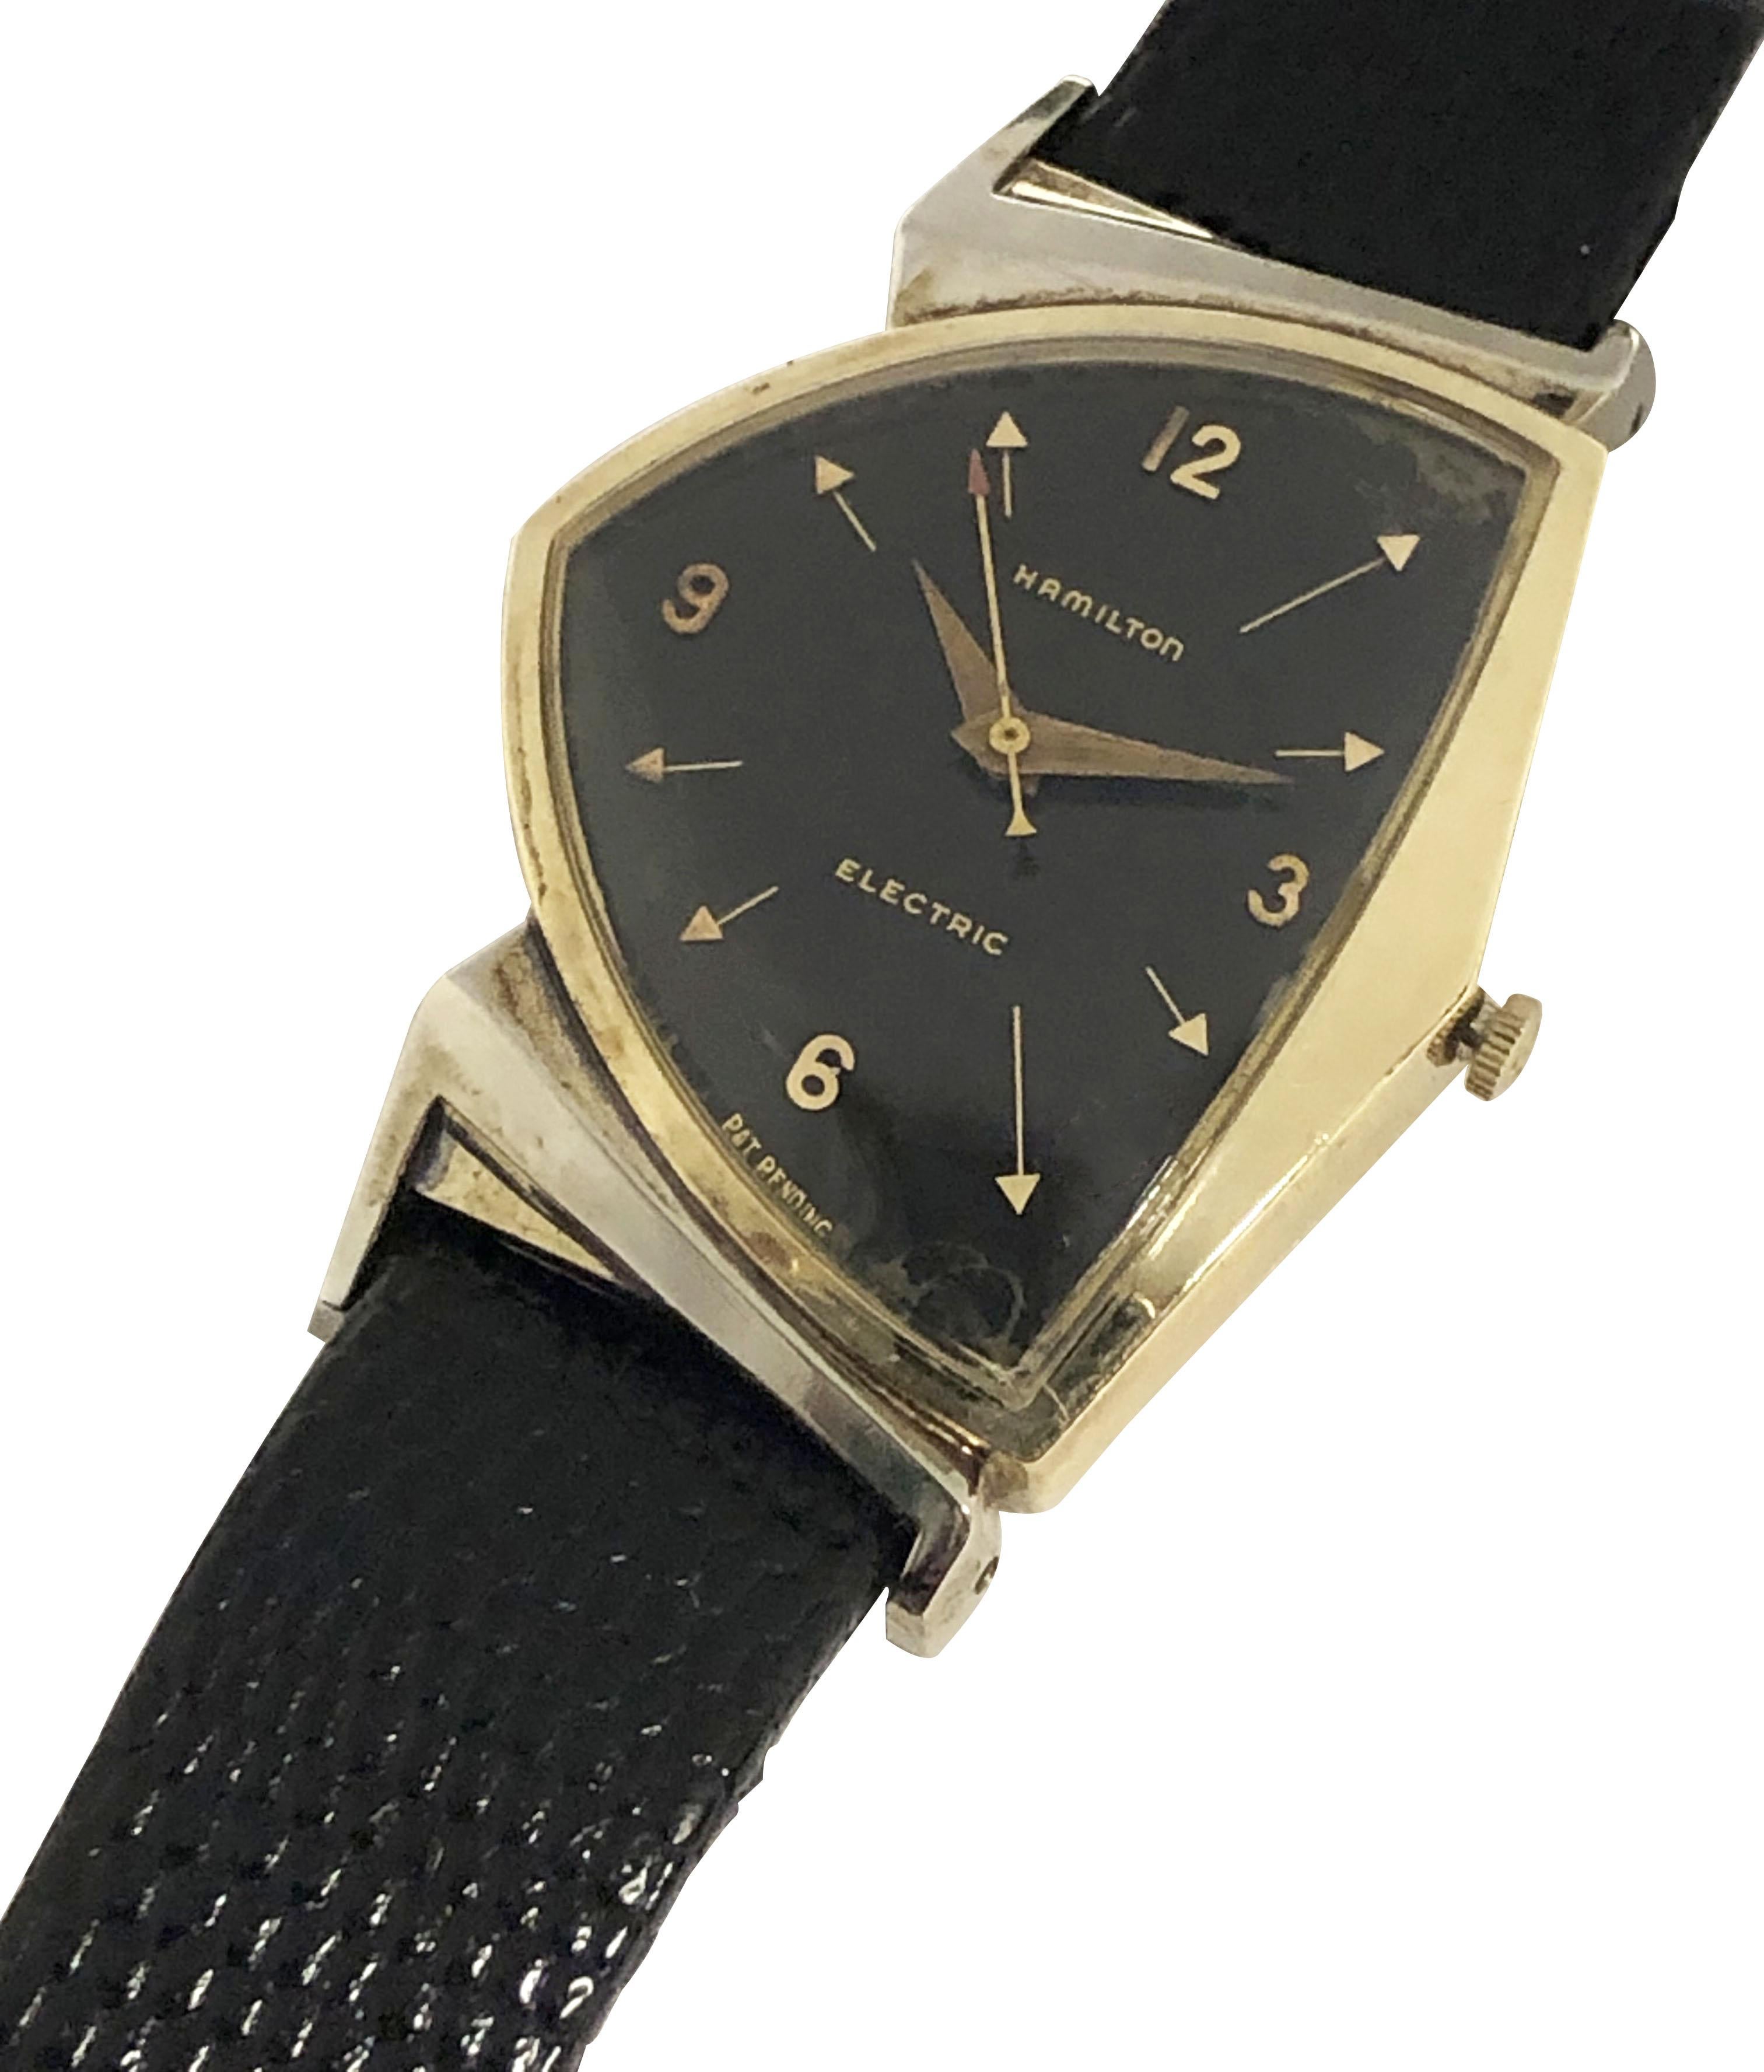 Circa 1960 Hamilton Pacer Wrist Watch 45 M.M  X  32 M.M. 10k Gold Filled two piece case. Hamilton 500 Electric Movement, Original Black Dial with Raised and Painted markers. New Black Lizard grain strap. Recently reconditioned and serviced by one of